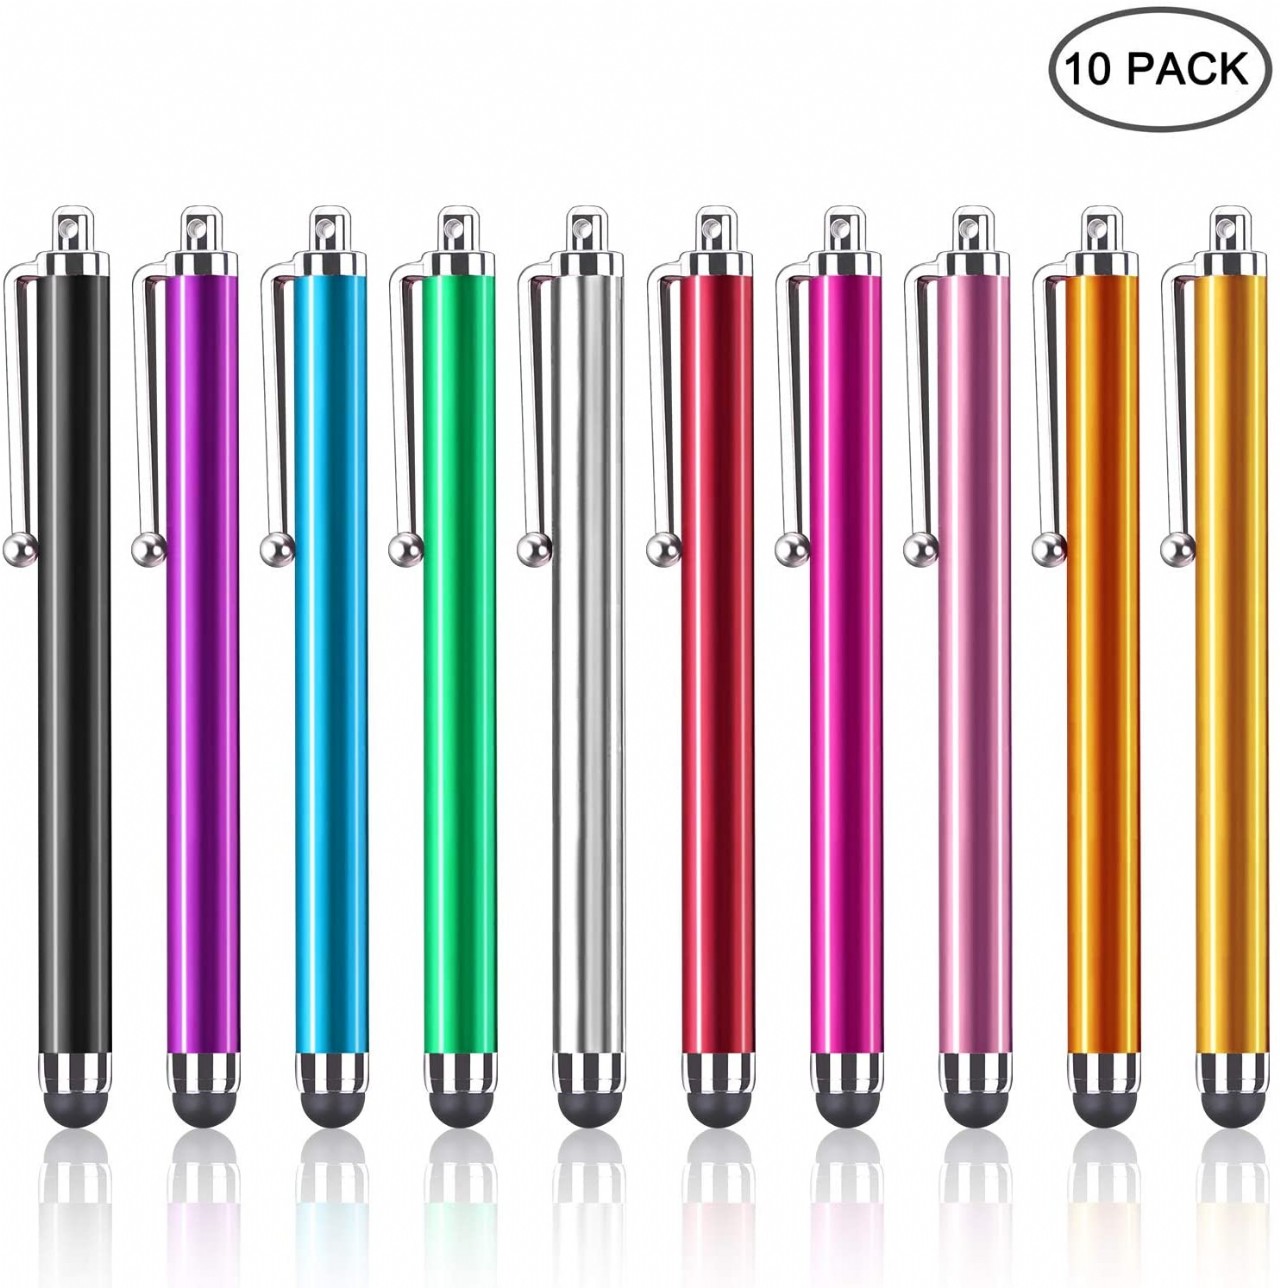 Assorted Colors Stylus Pen Universal Touch Screen Capacitive Stylus for Kindle Touch Screen